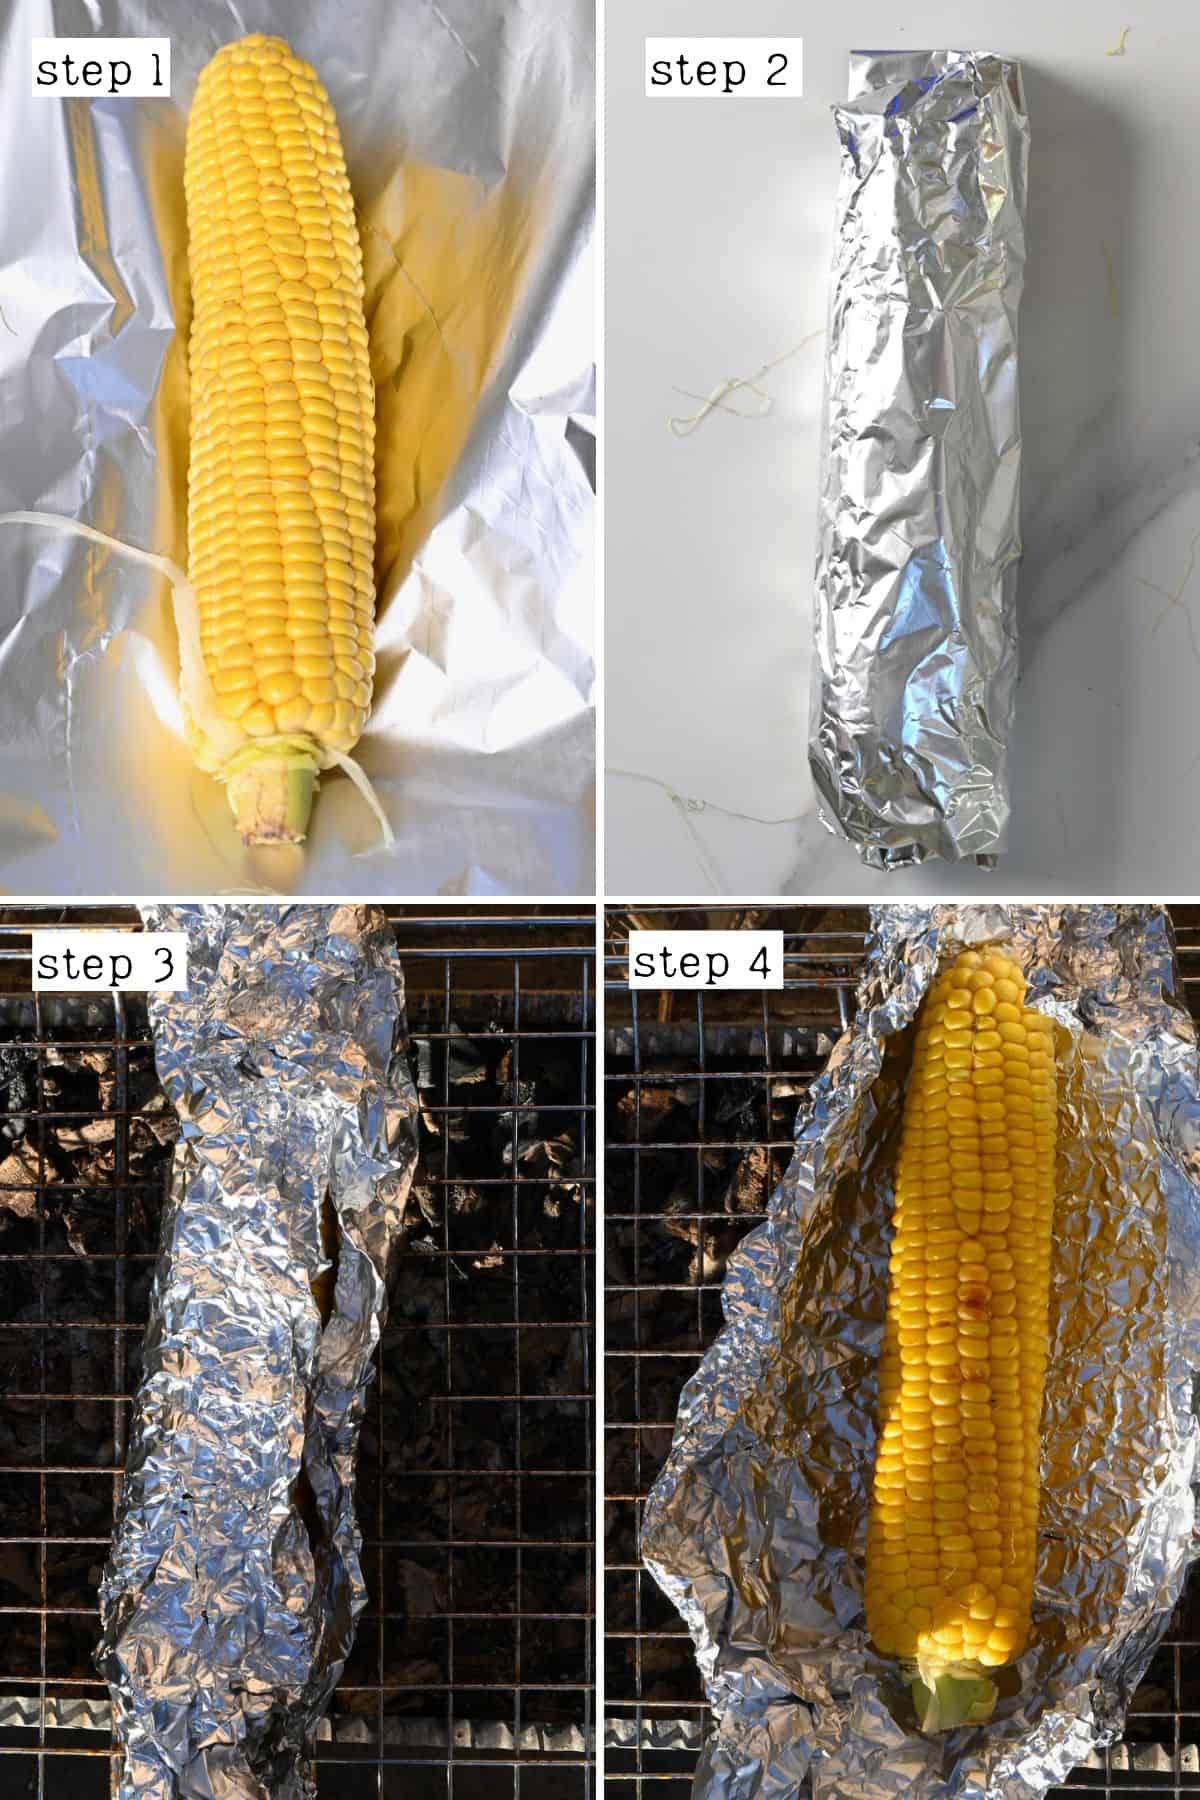 Grilled Corn in Foil – A Couple Cooks